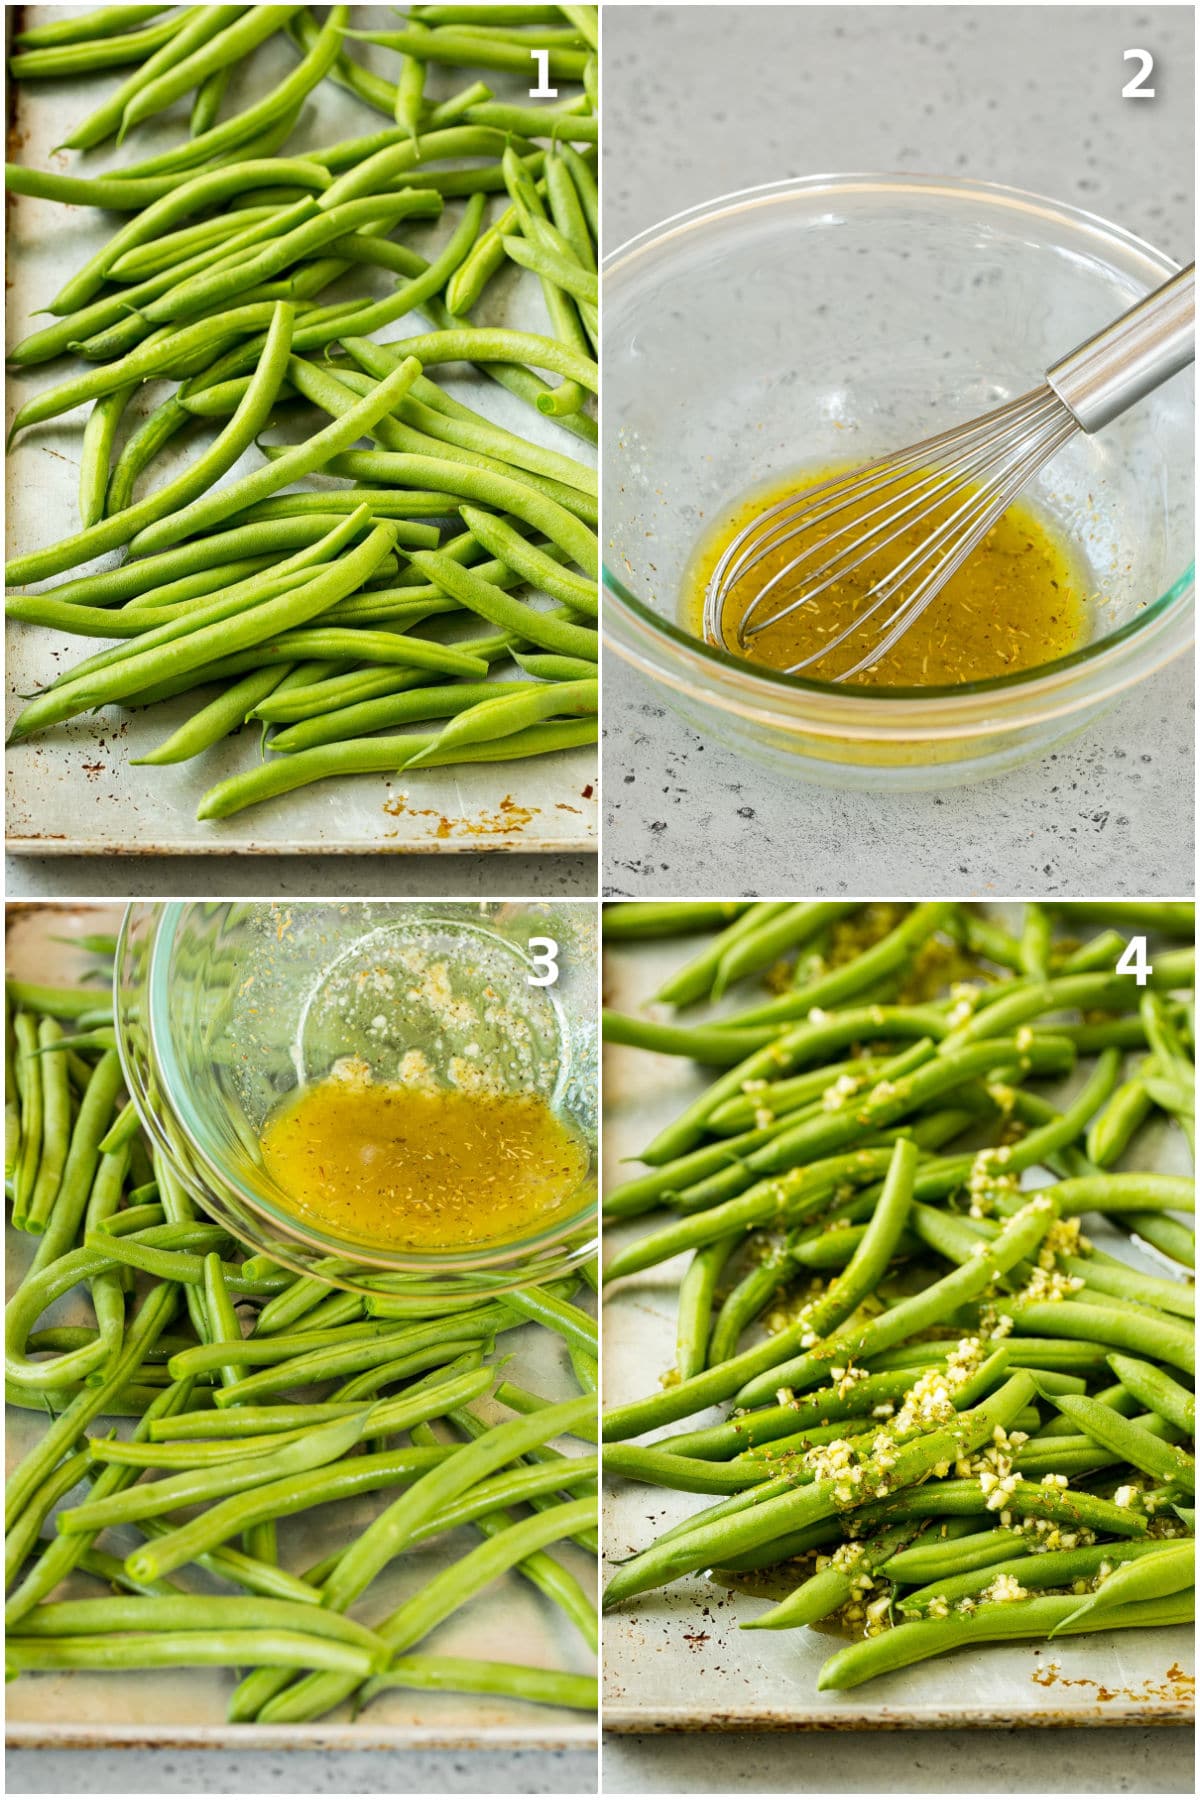 Step by step process shots showing how to roast green beans.